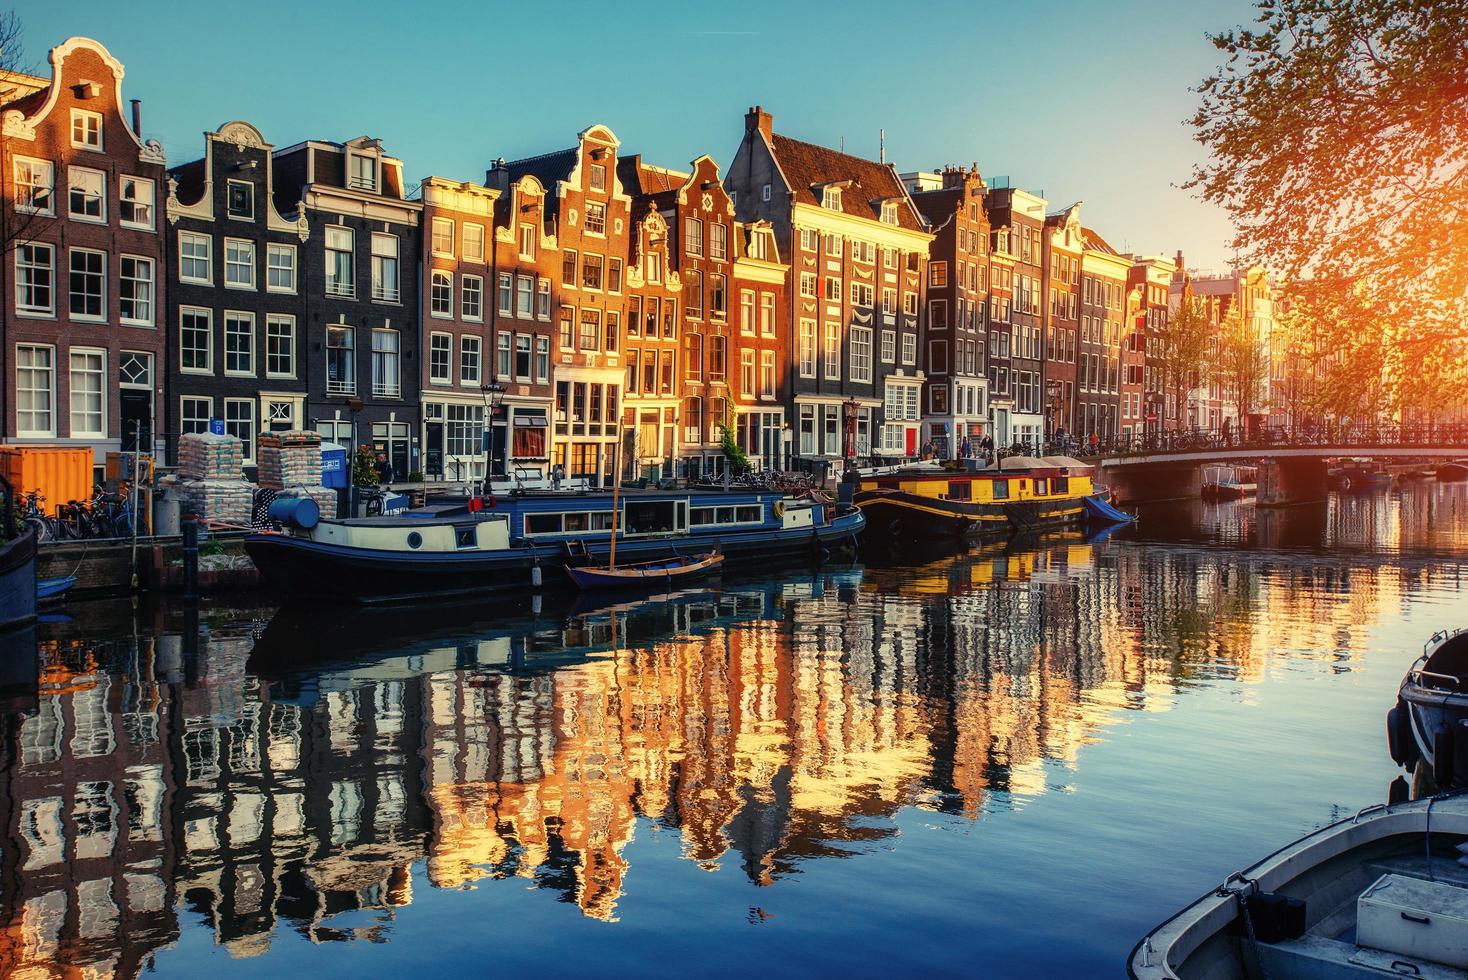 Canal at sunset. Amsterdam is the capital photo